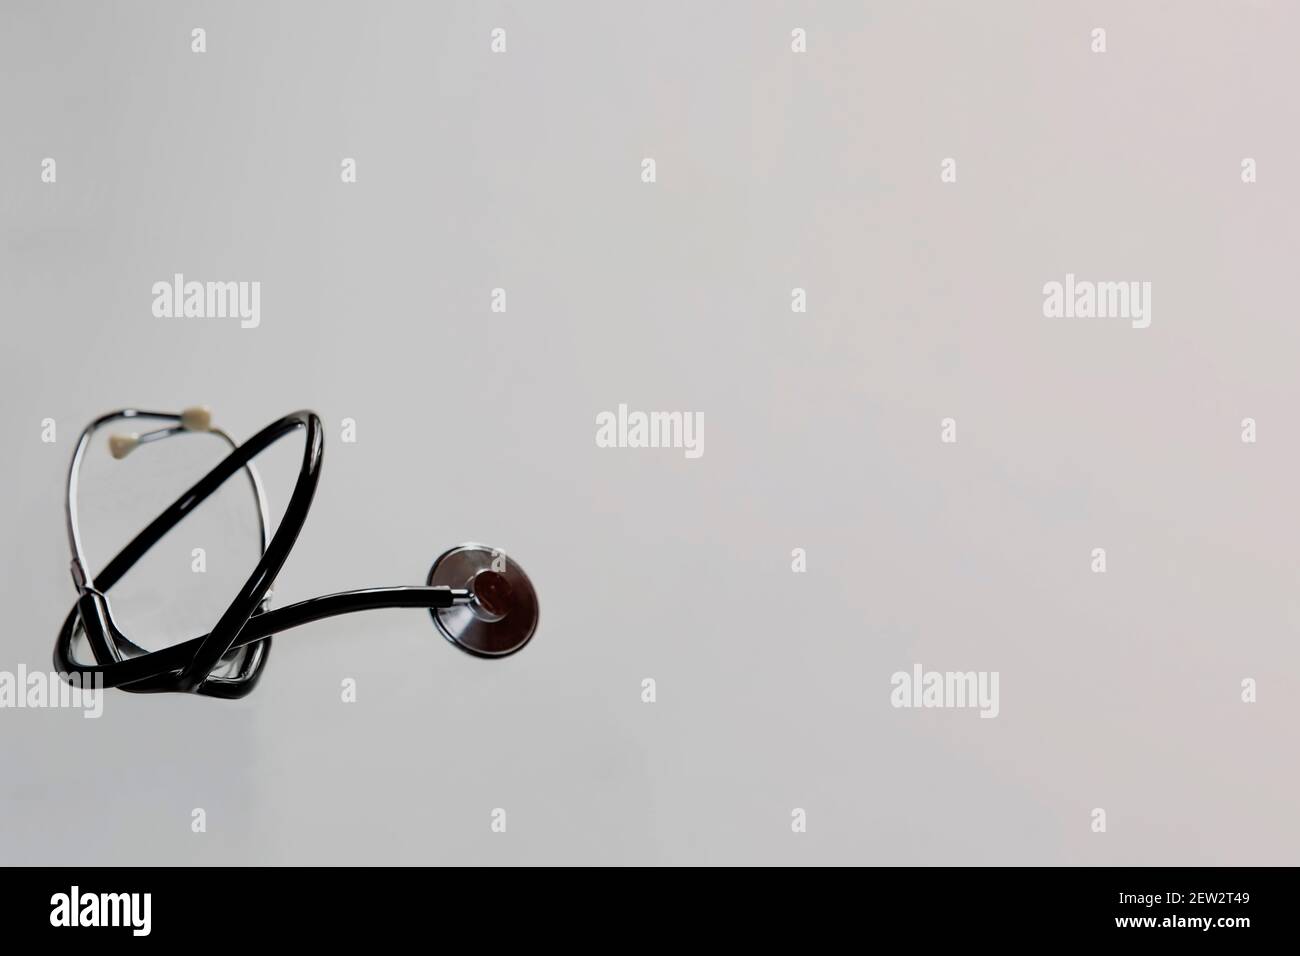 The stethoscope alone lies on a light background.  Stock Photo